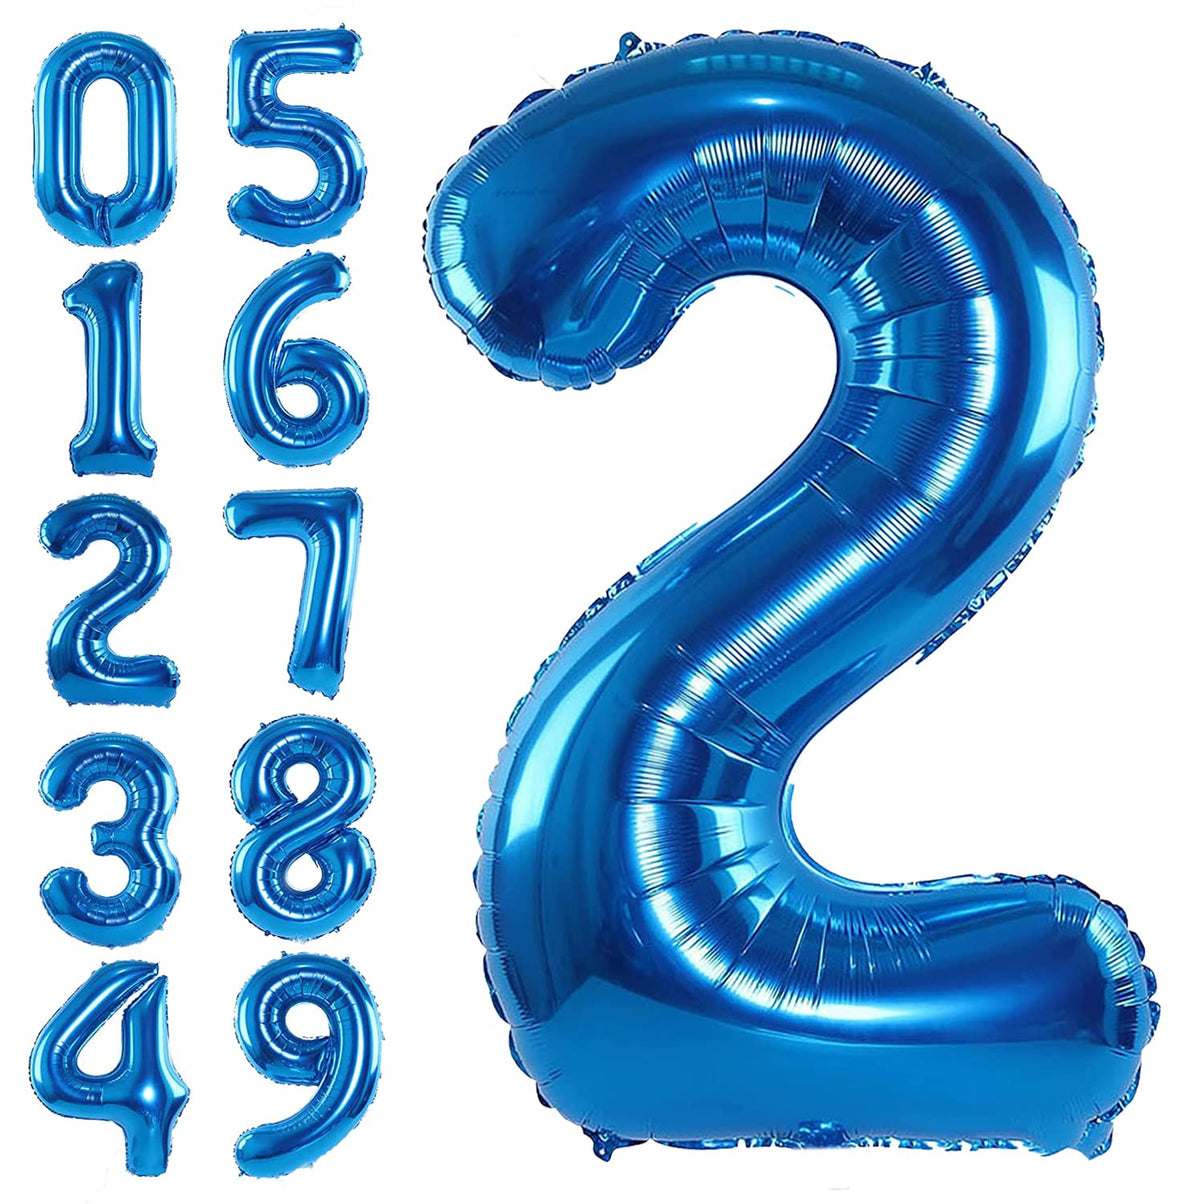 Tomario 40 Inch Large Number Balloon, Giant Foil Number Balloons for Birthday Party Decoration, Anniversaries (Blue, Number 2)